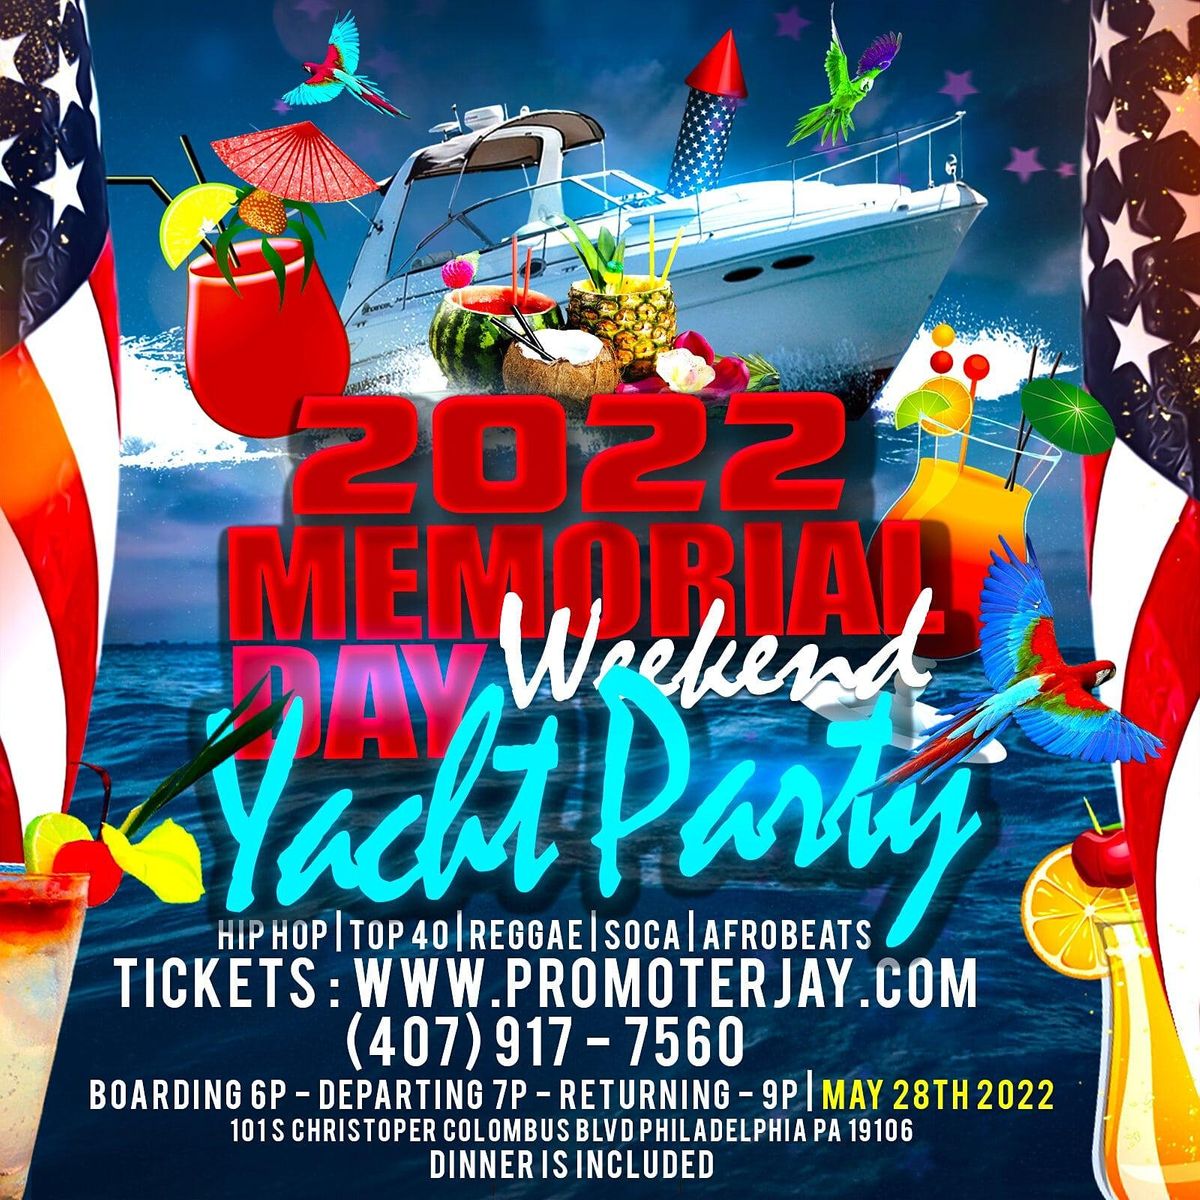 2022 Memorial Day Weekend Yacht Party, THE BEN FRANKLIN YACHT